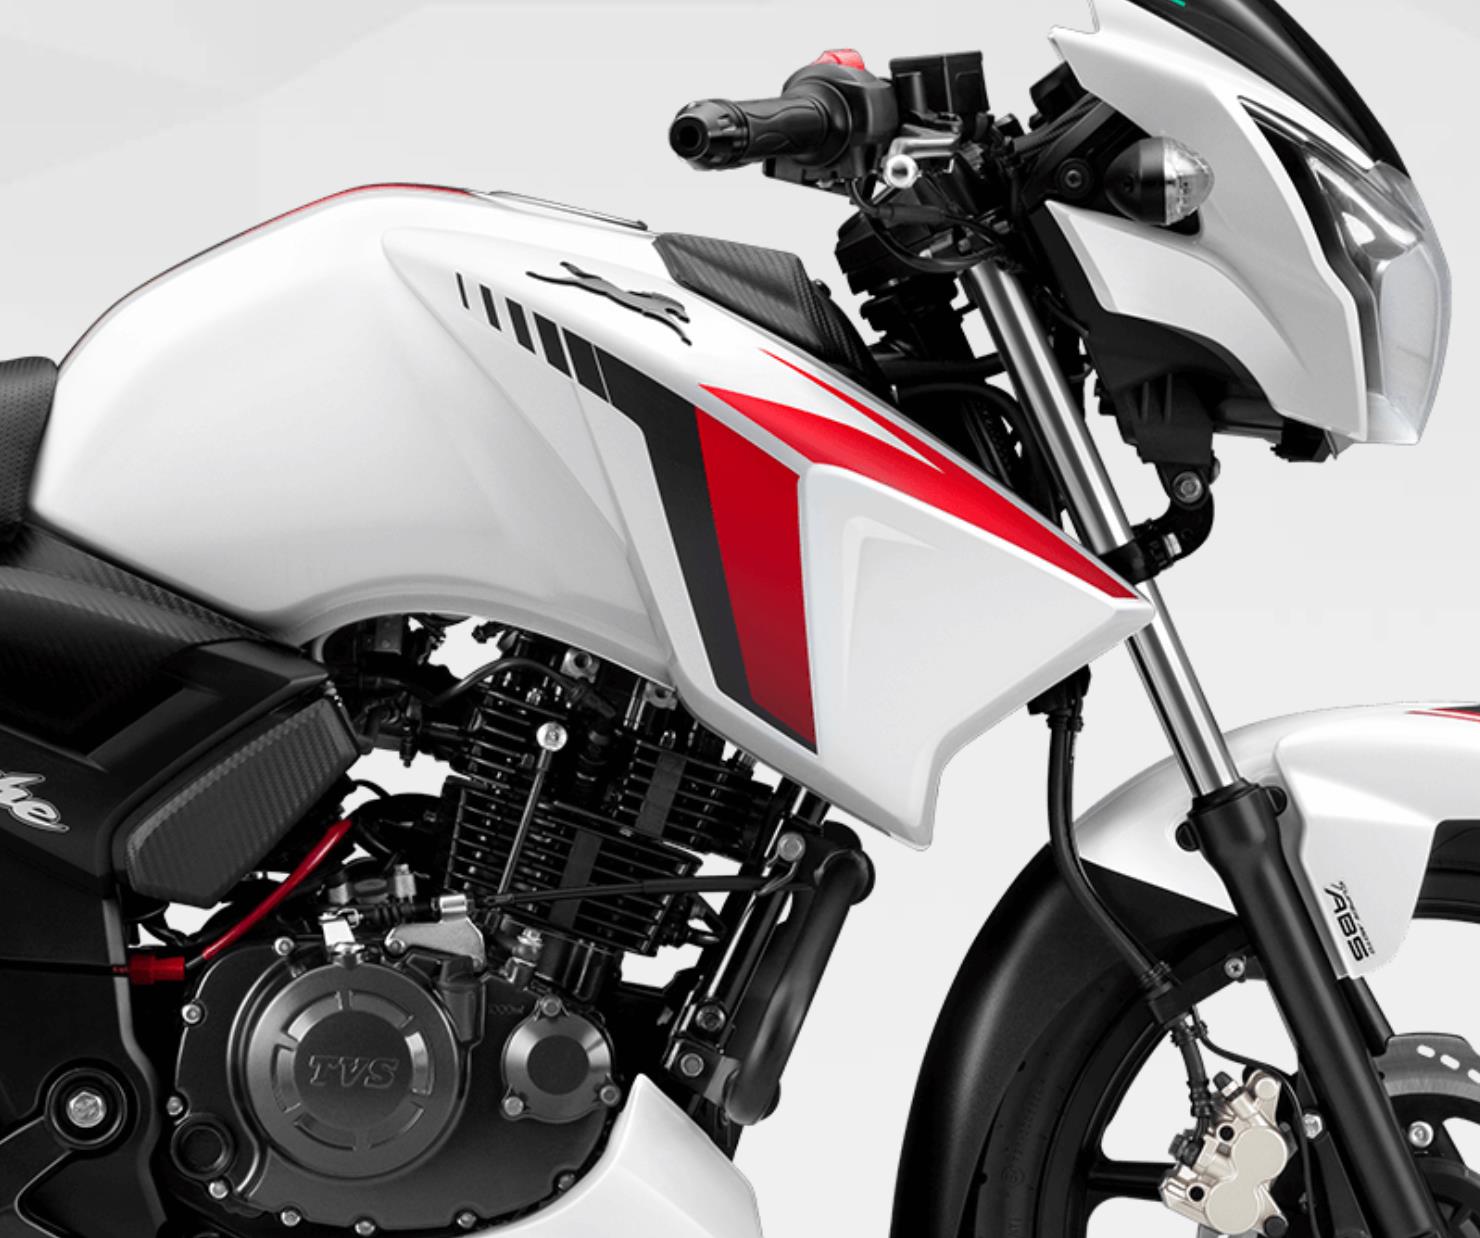 21 Tvs Apache Rtr 160 2v Price Top Speed Mileage In India